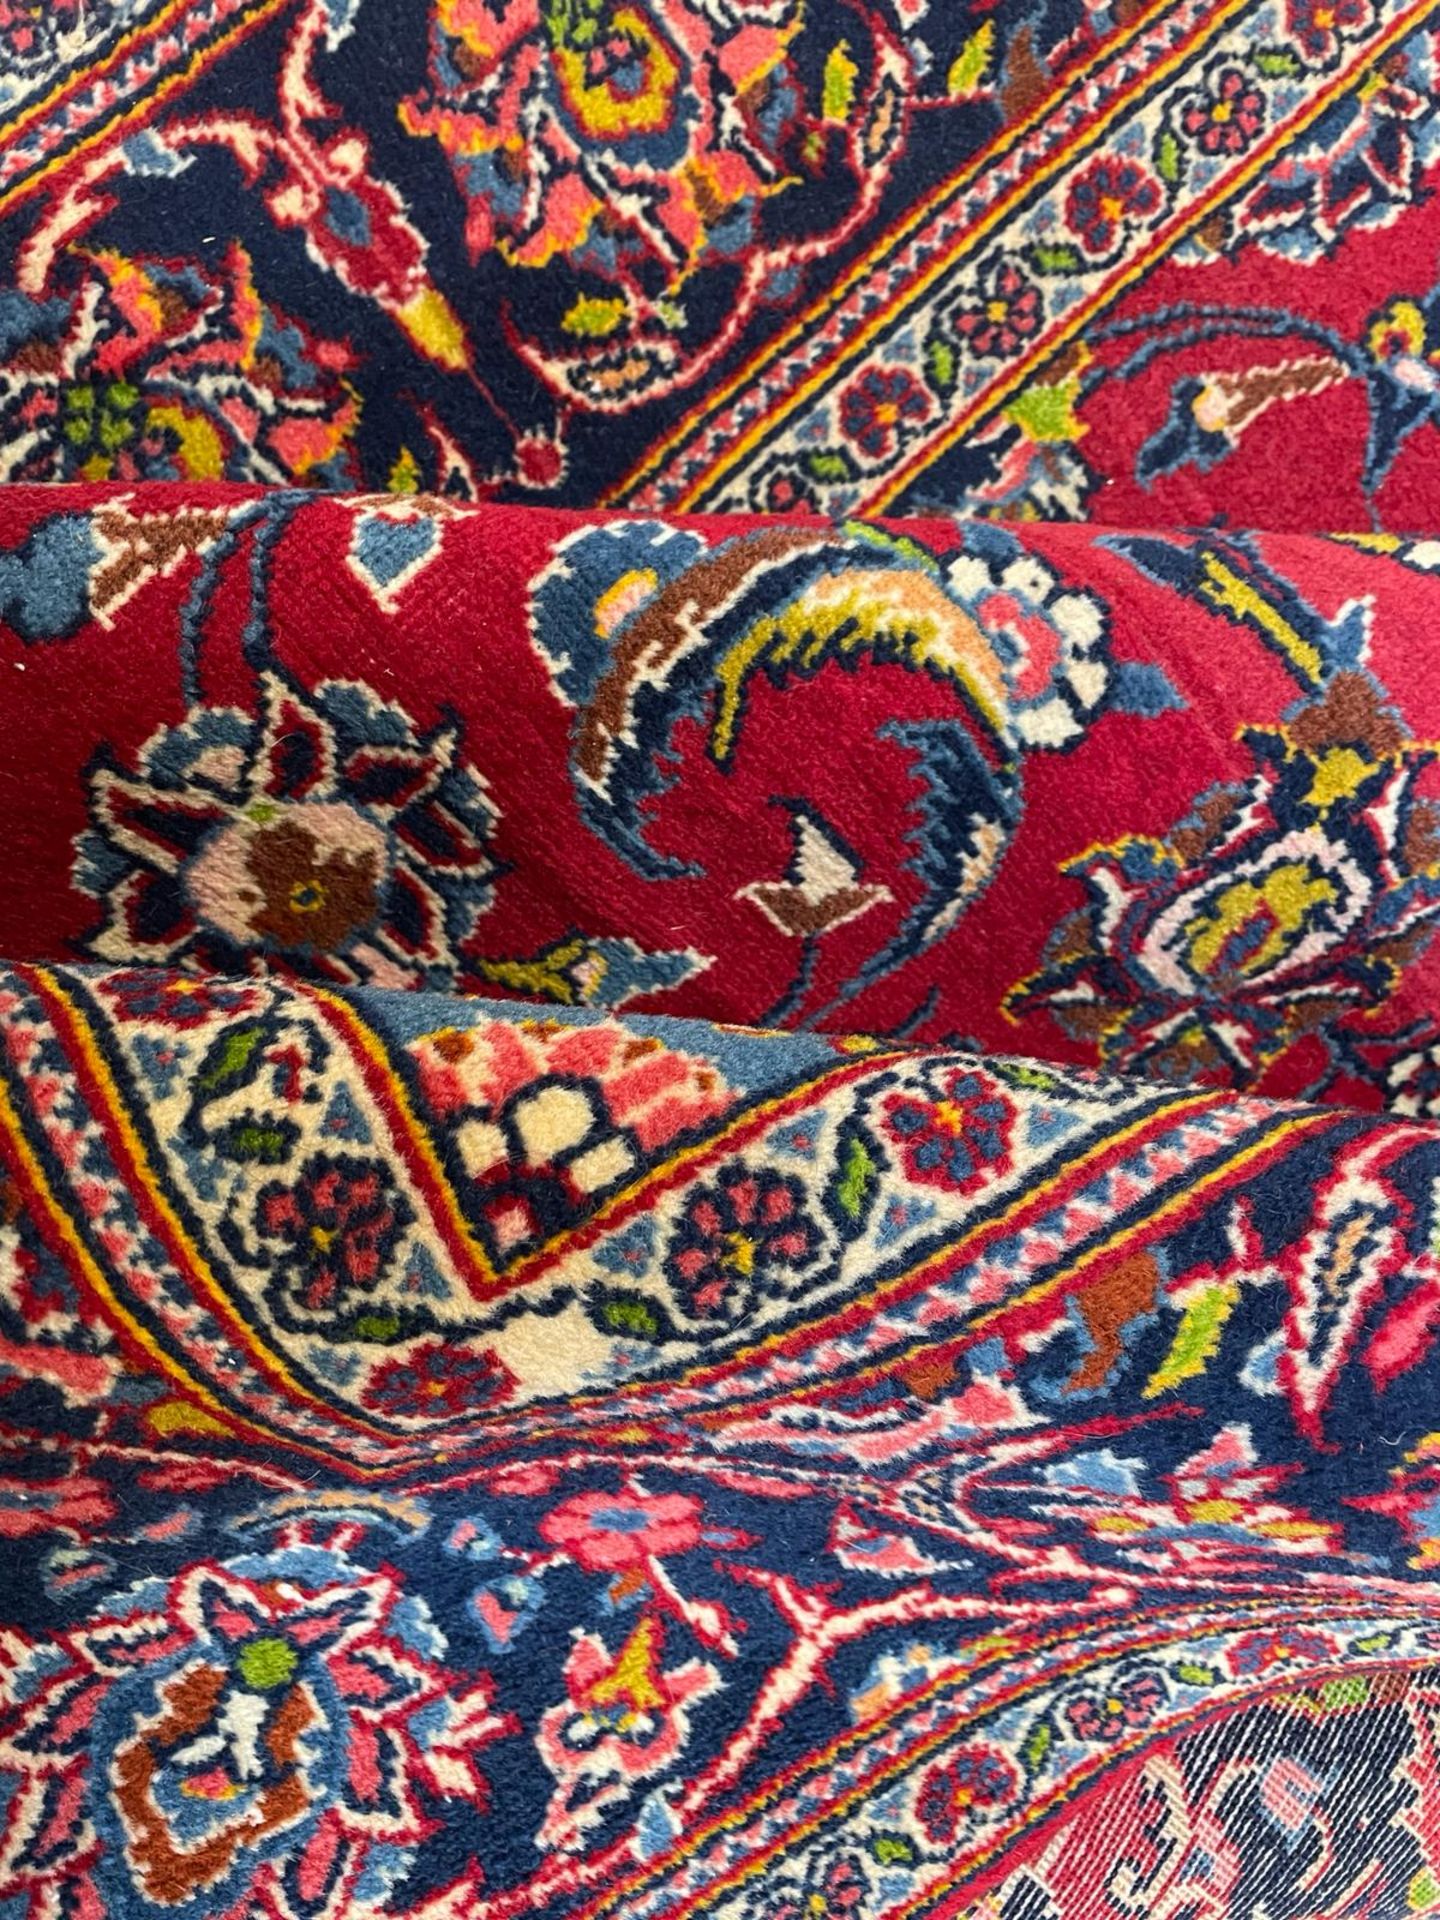 20TH CENTURY CENTRAL PERSIAN KASHAN CARPET RUG - Image 4 of 4